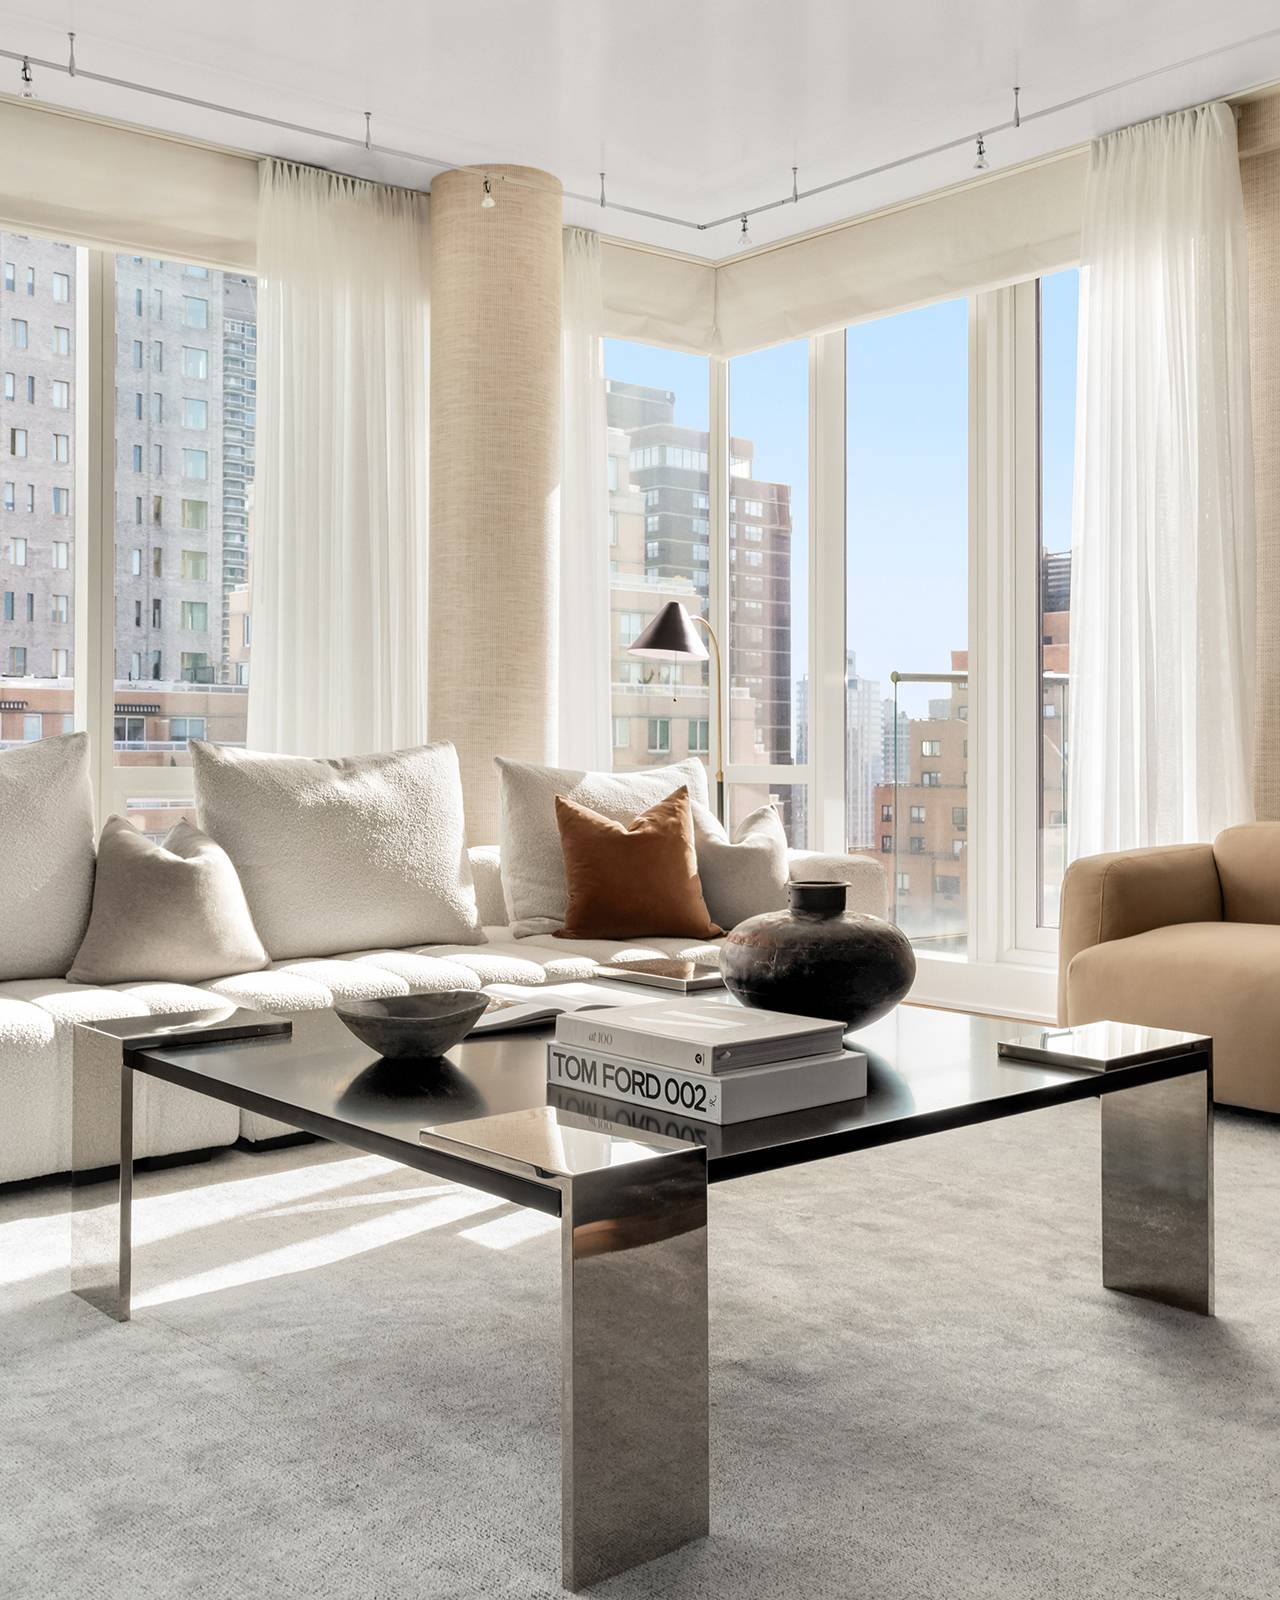 Designed with the highest standards of luxury and convenience in mind, this spectacular, approximate 7, 000 square foot duplex features 5 bedrooms, 51 2 bathrooms and a sprawling rooftop terrace ...